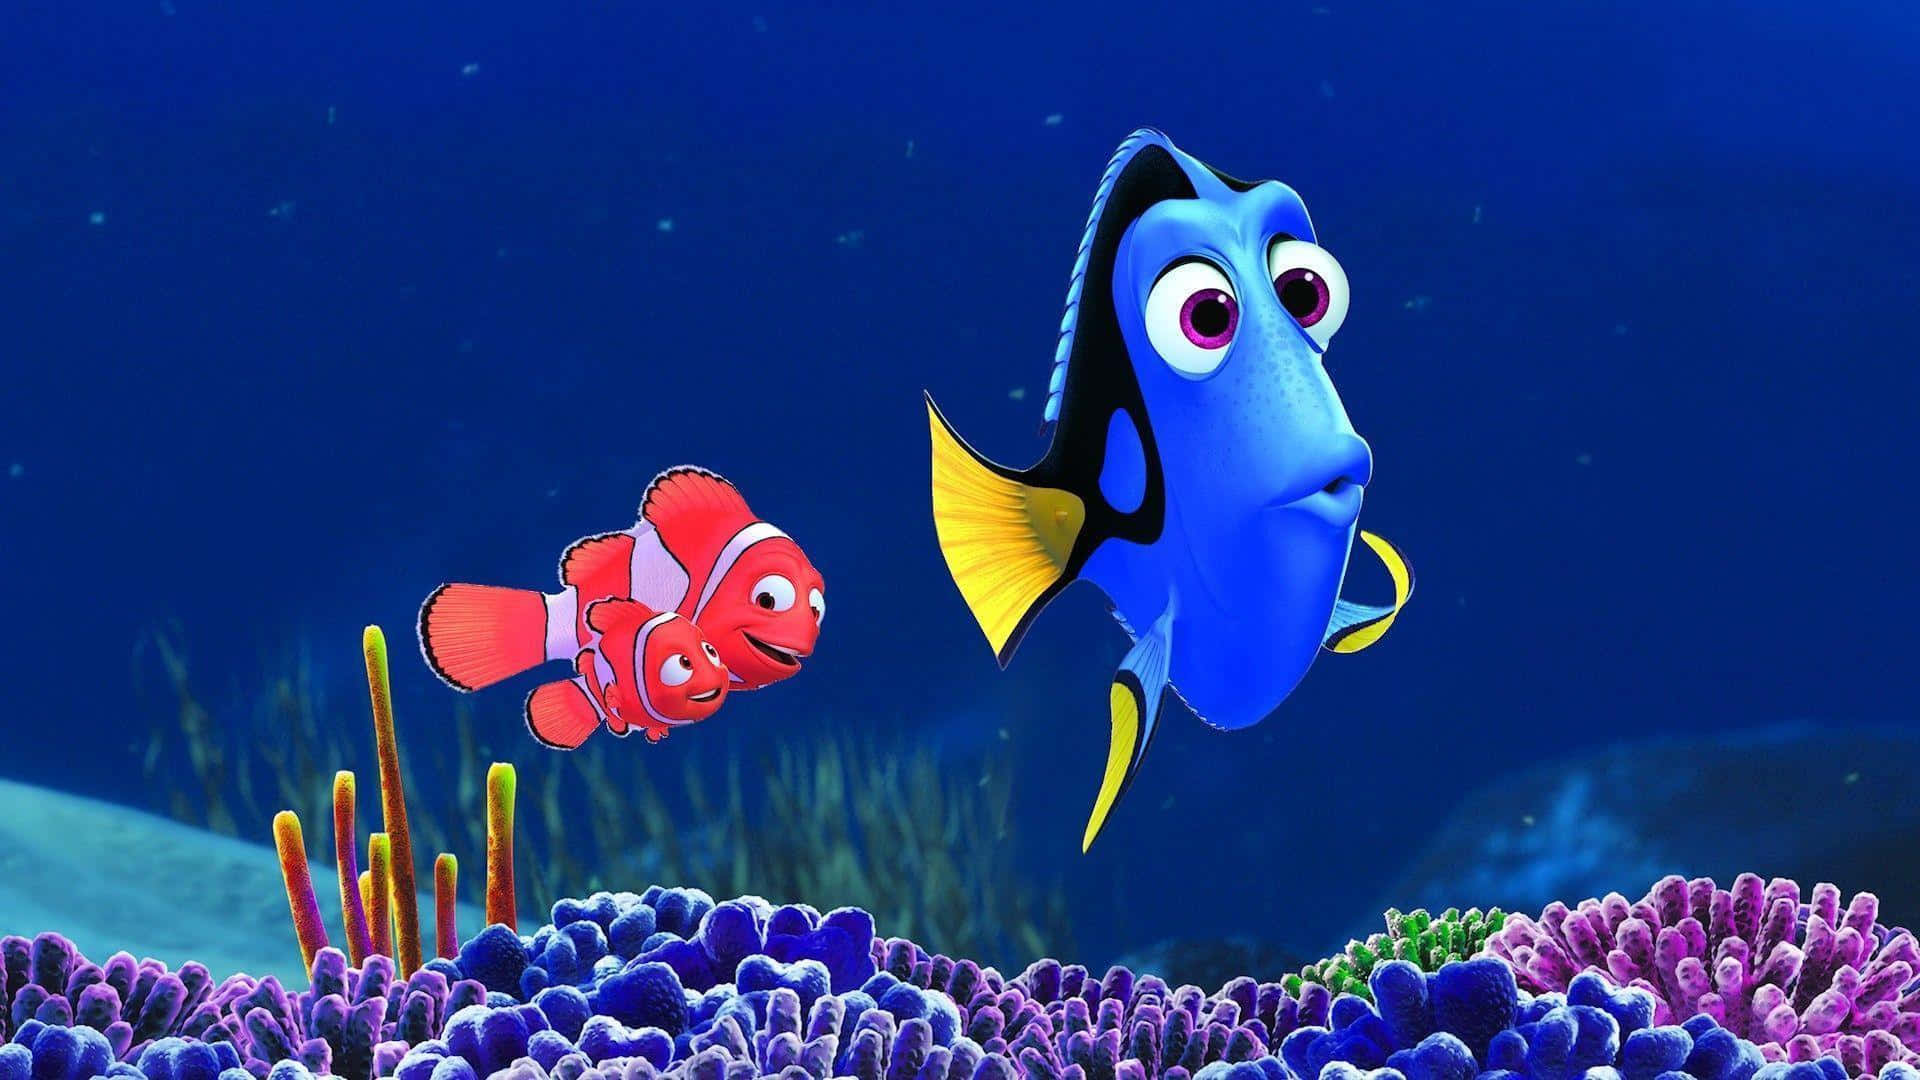 Best Disney Background Main Characters Of Finding Nemo